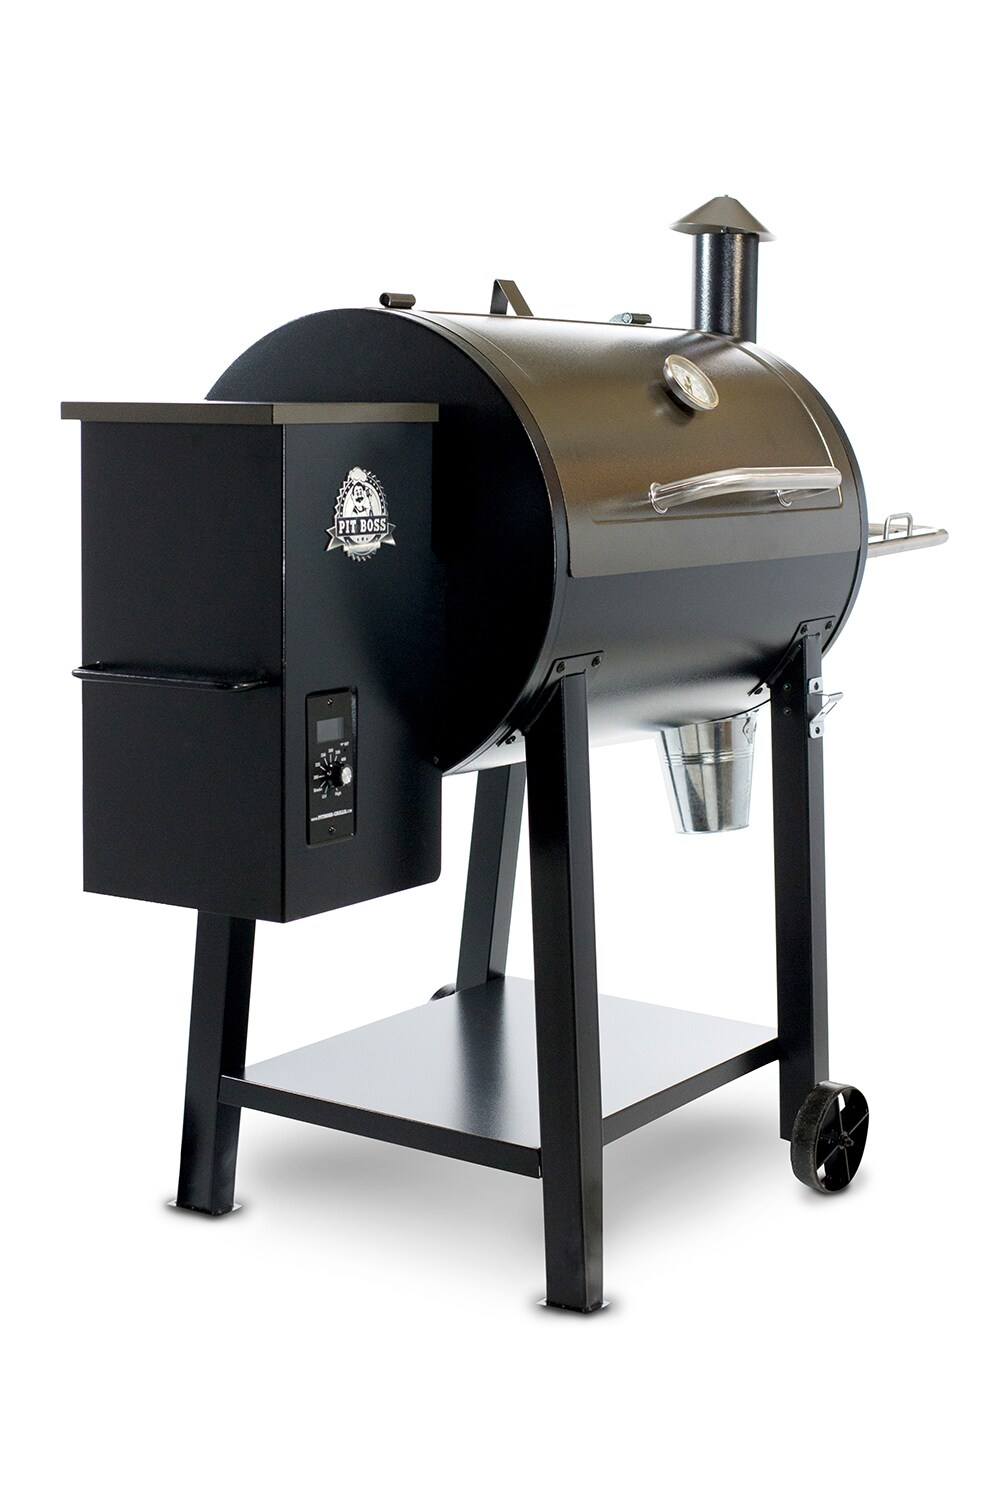 Pit Boss 820-Sq in Pellet Grill at Lowes.com